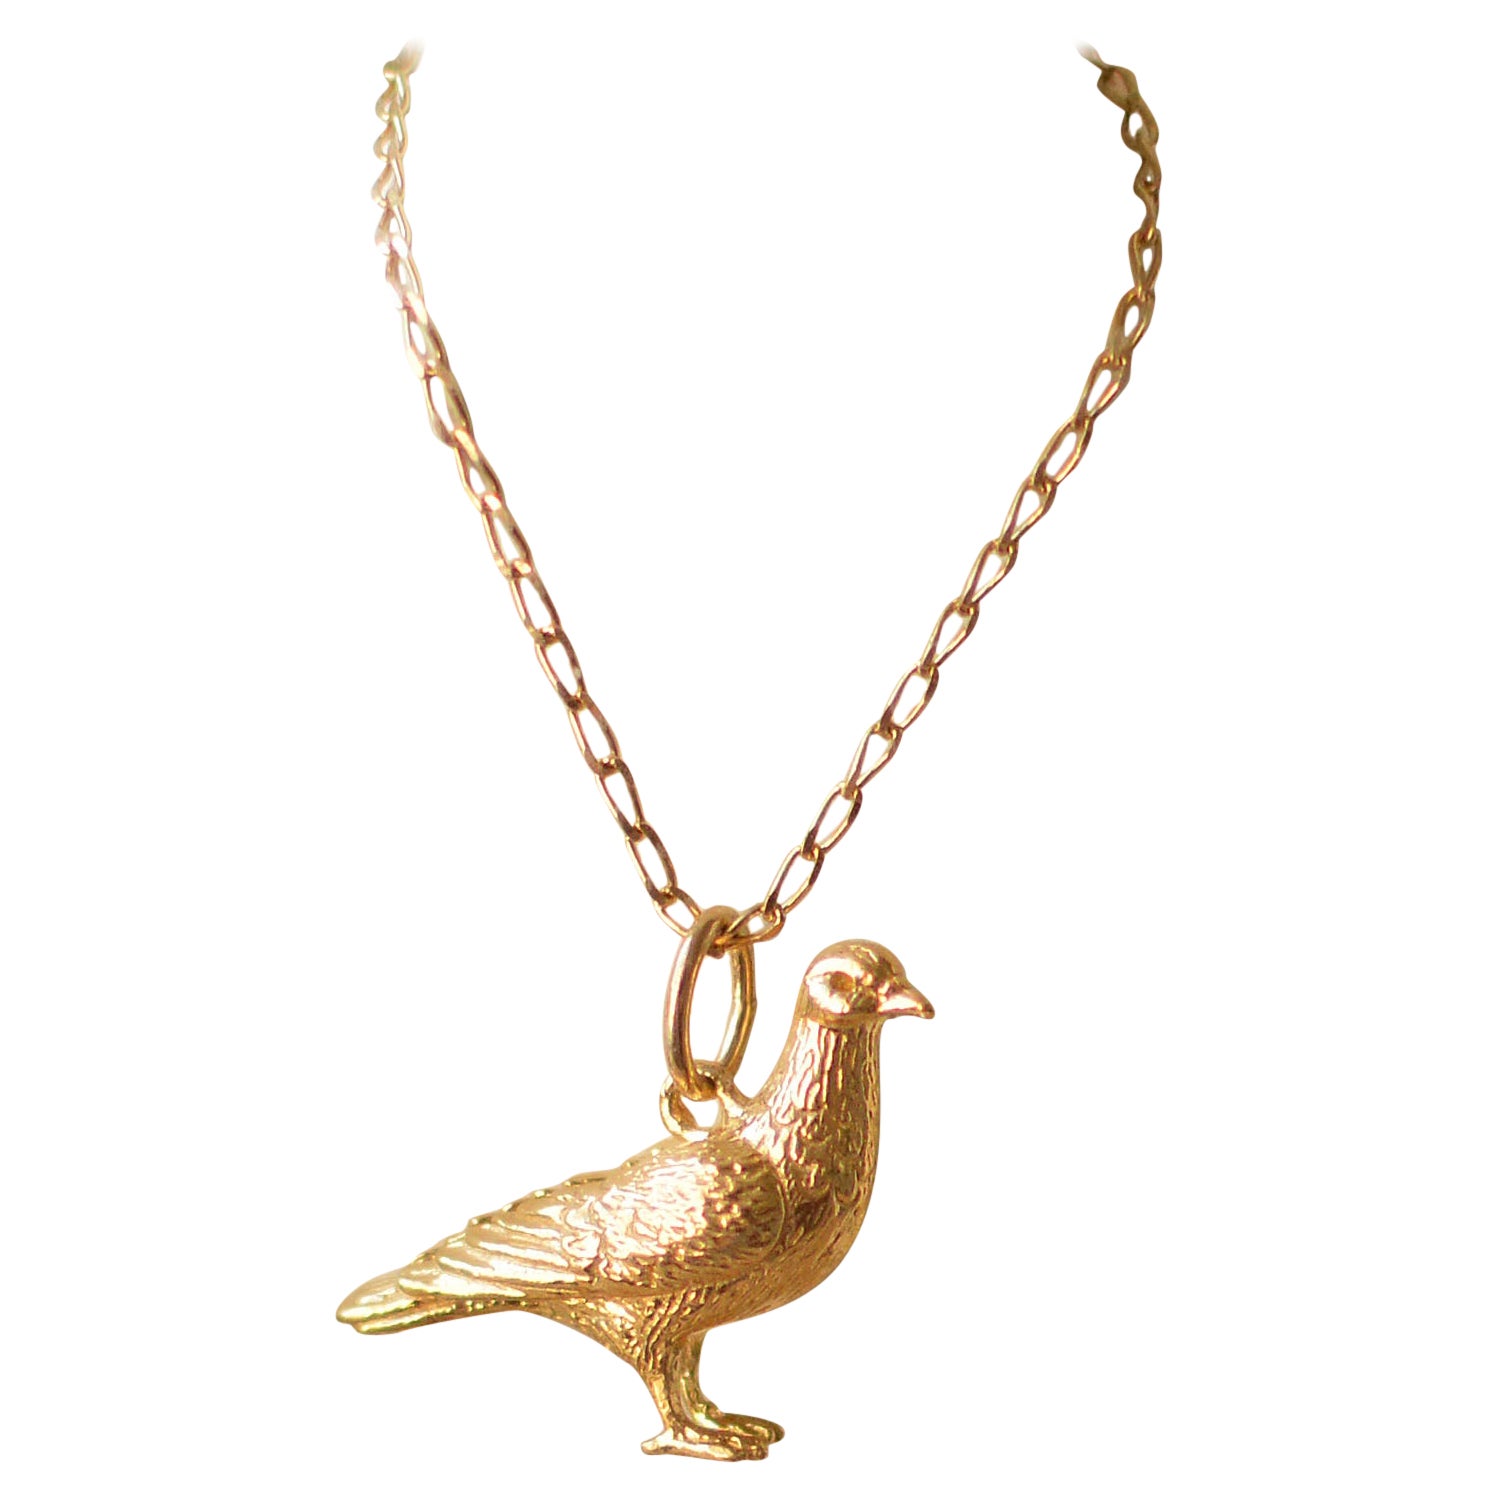 Solid 18 Carat Gold Pigeon Pendant by Lucy Stopes-Roe